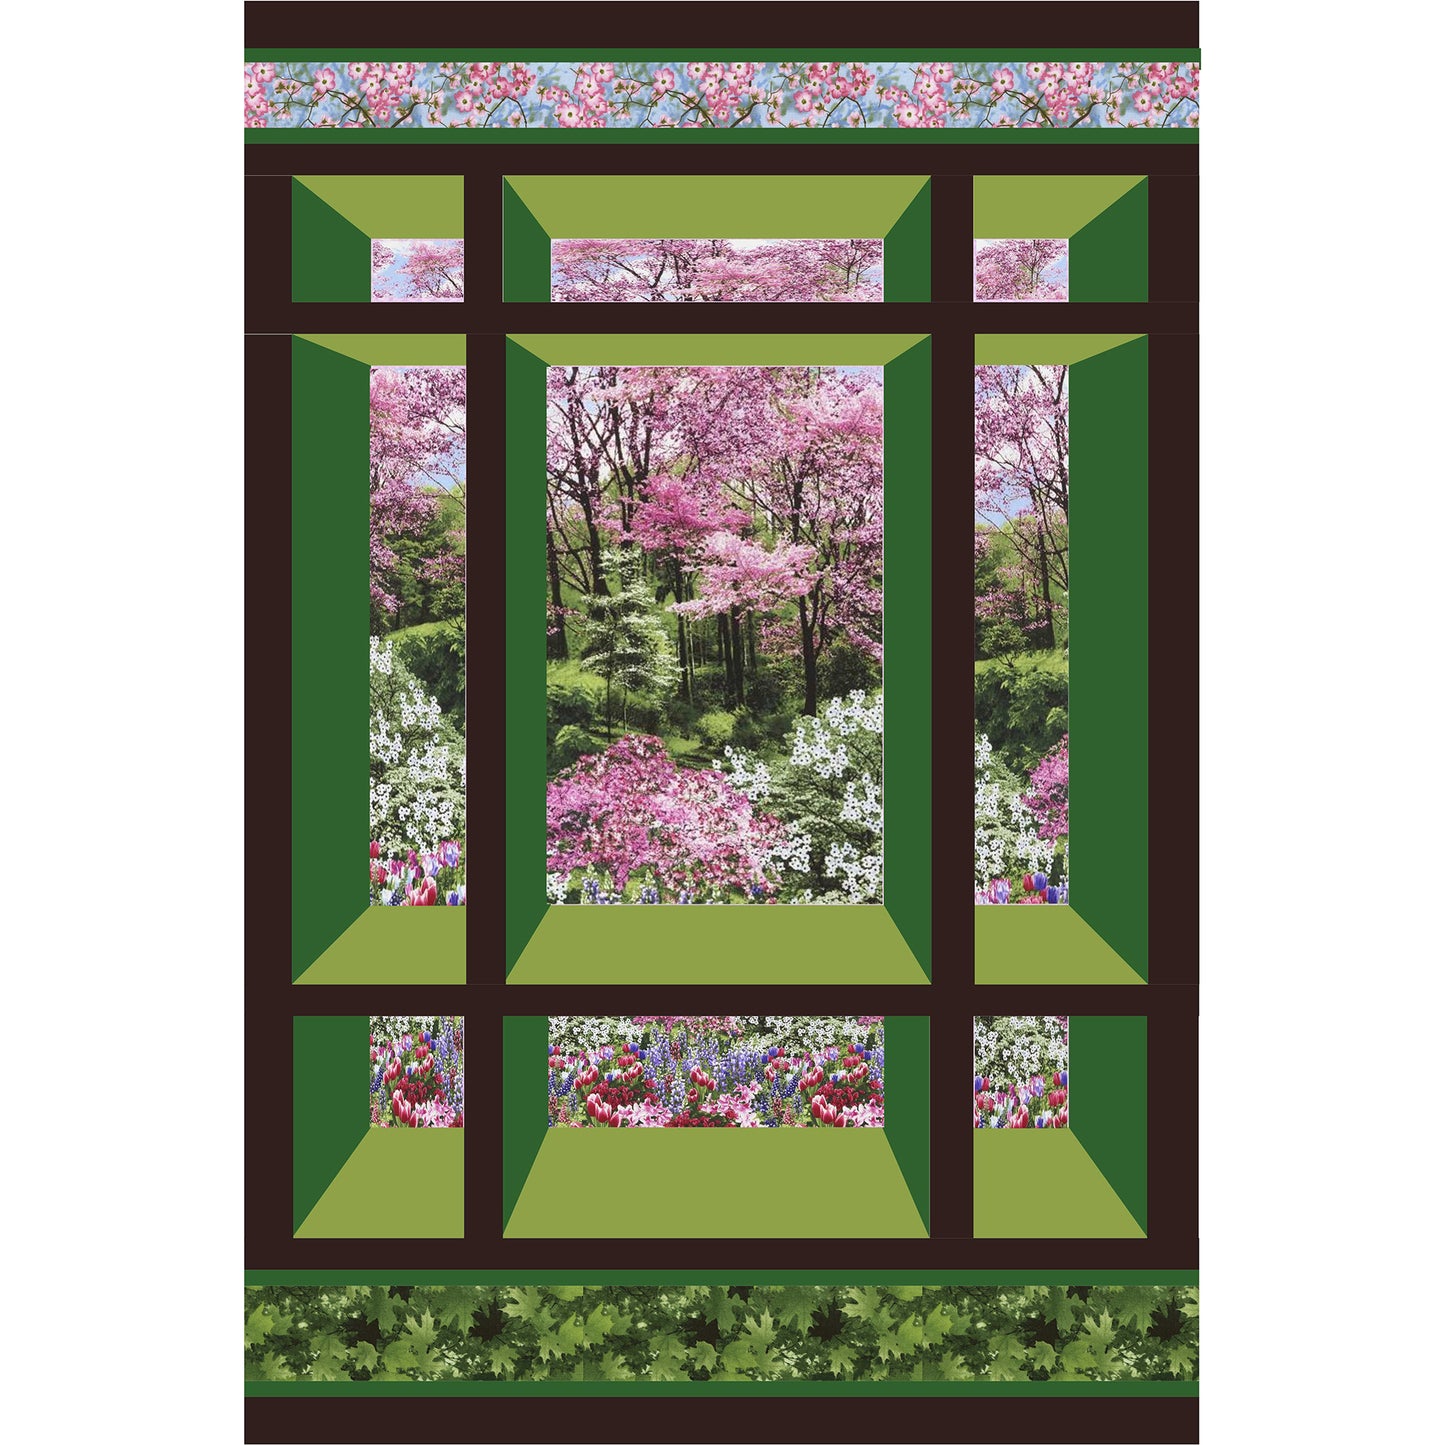 Quilt featuring a window design and a spring garden scene. Pattern designed for pre-printed panels or large scale fabrics.